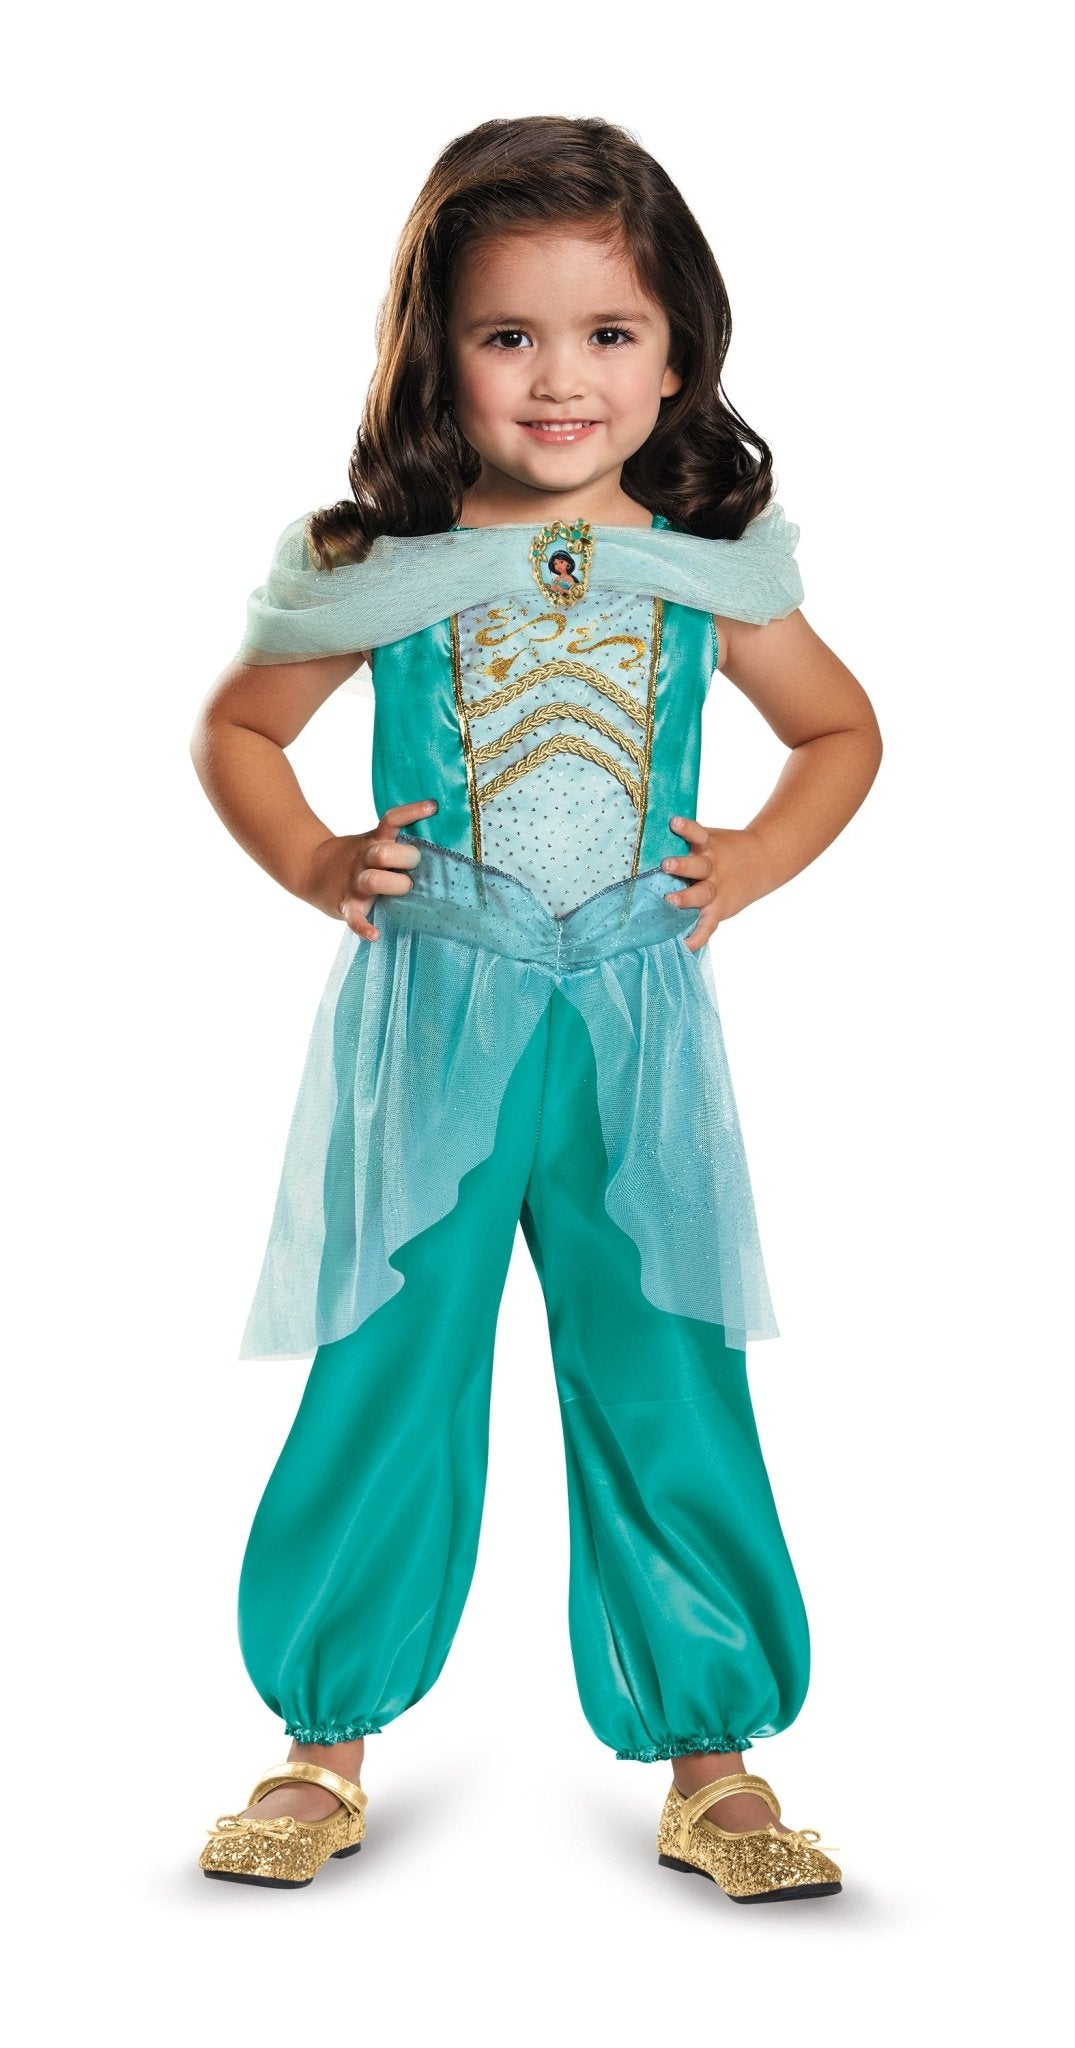 Toddler Jasmine Costume DIS-82893 LARGE (4-6X) - JJ's Party House